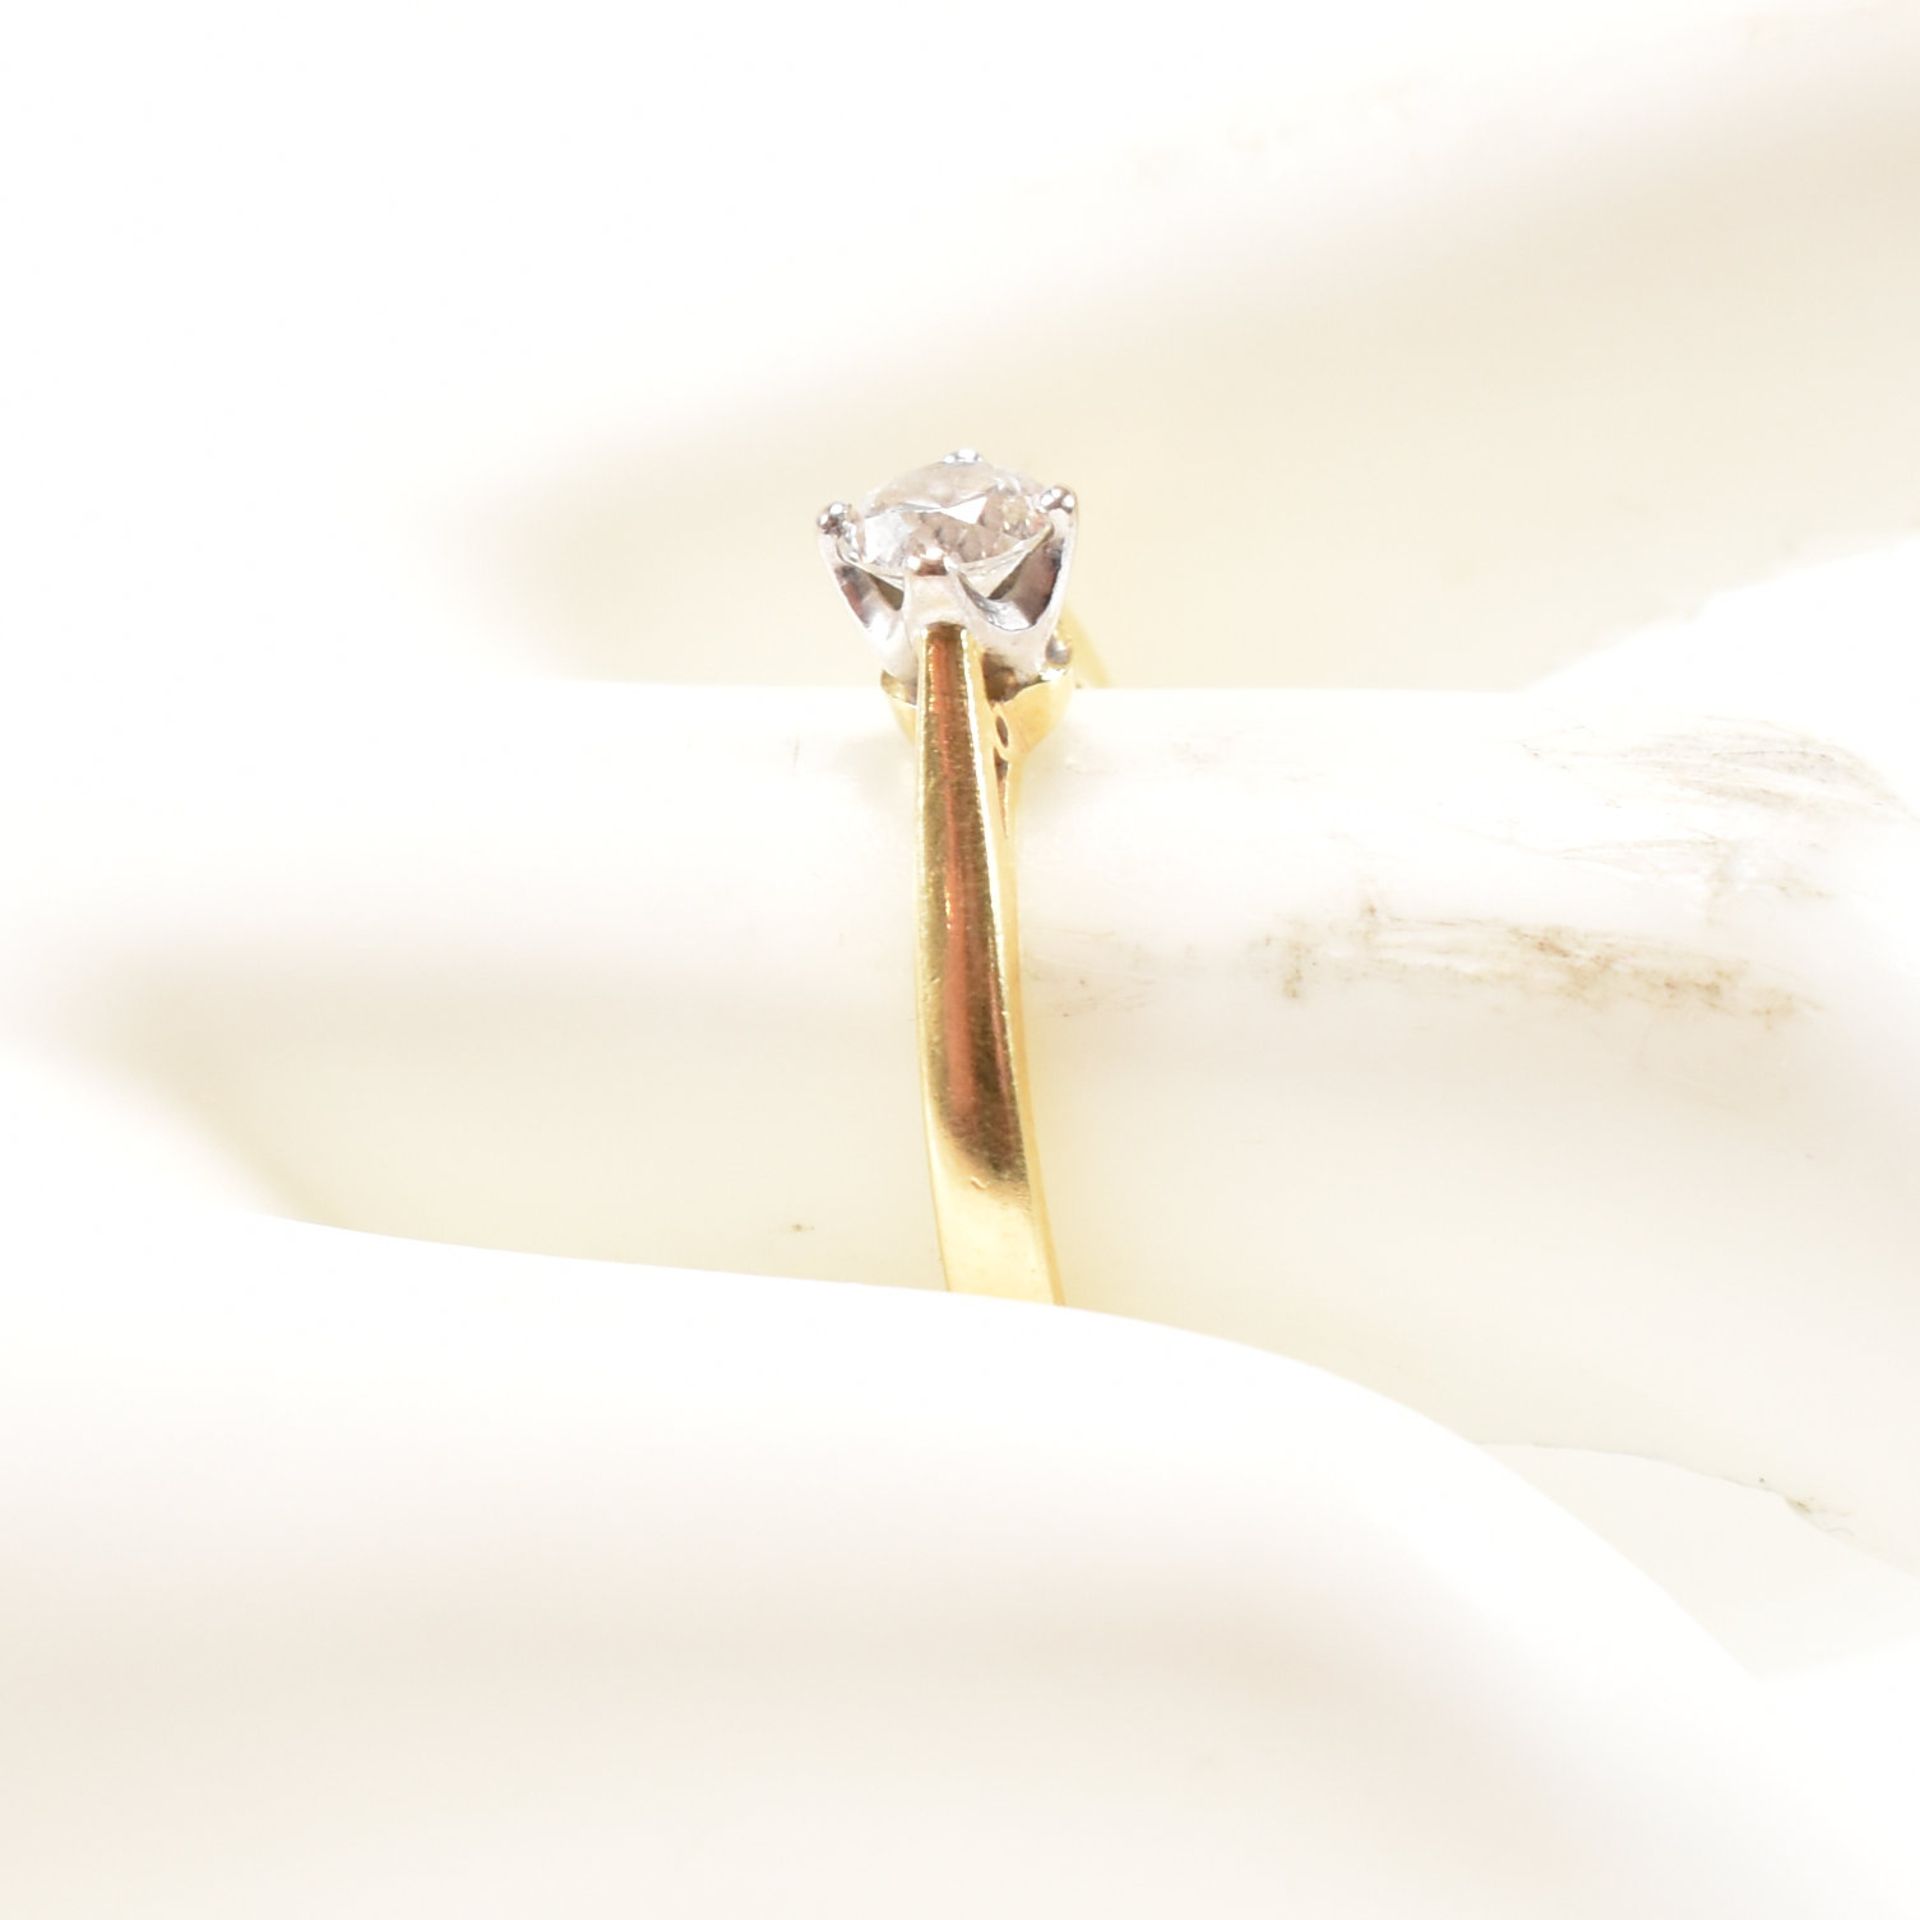 HALLMARKED 9CT GOLD & DIAMOND SOLITAIRE RING - Image 8 of 8